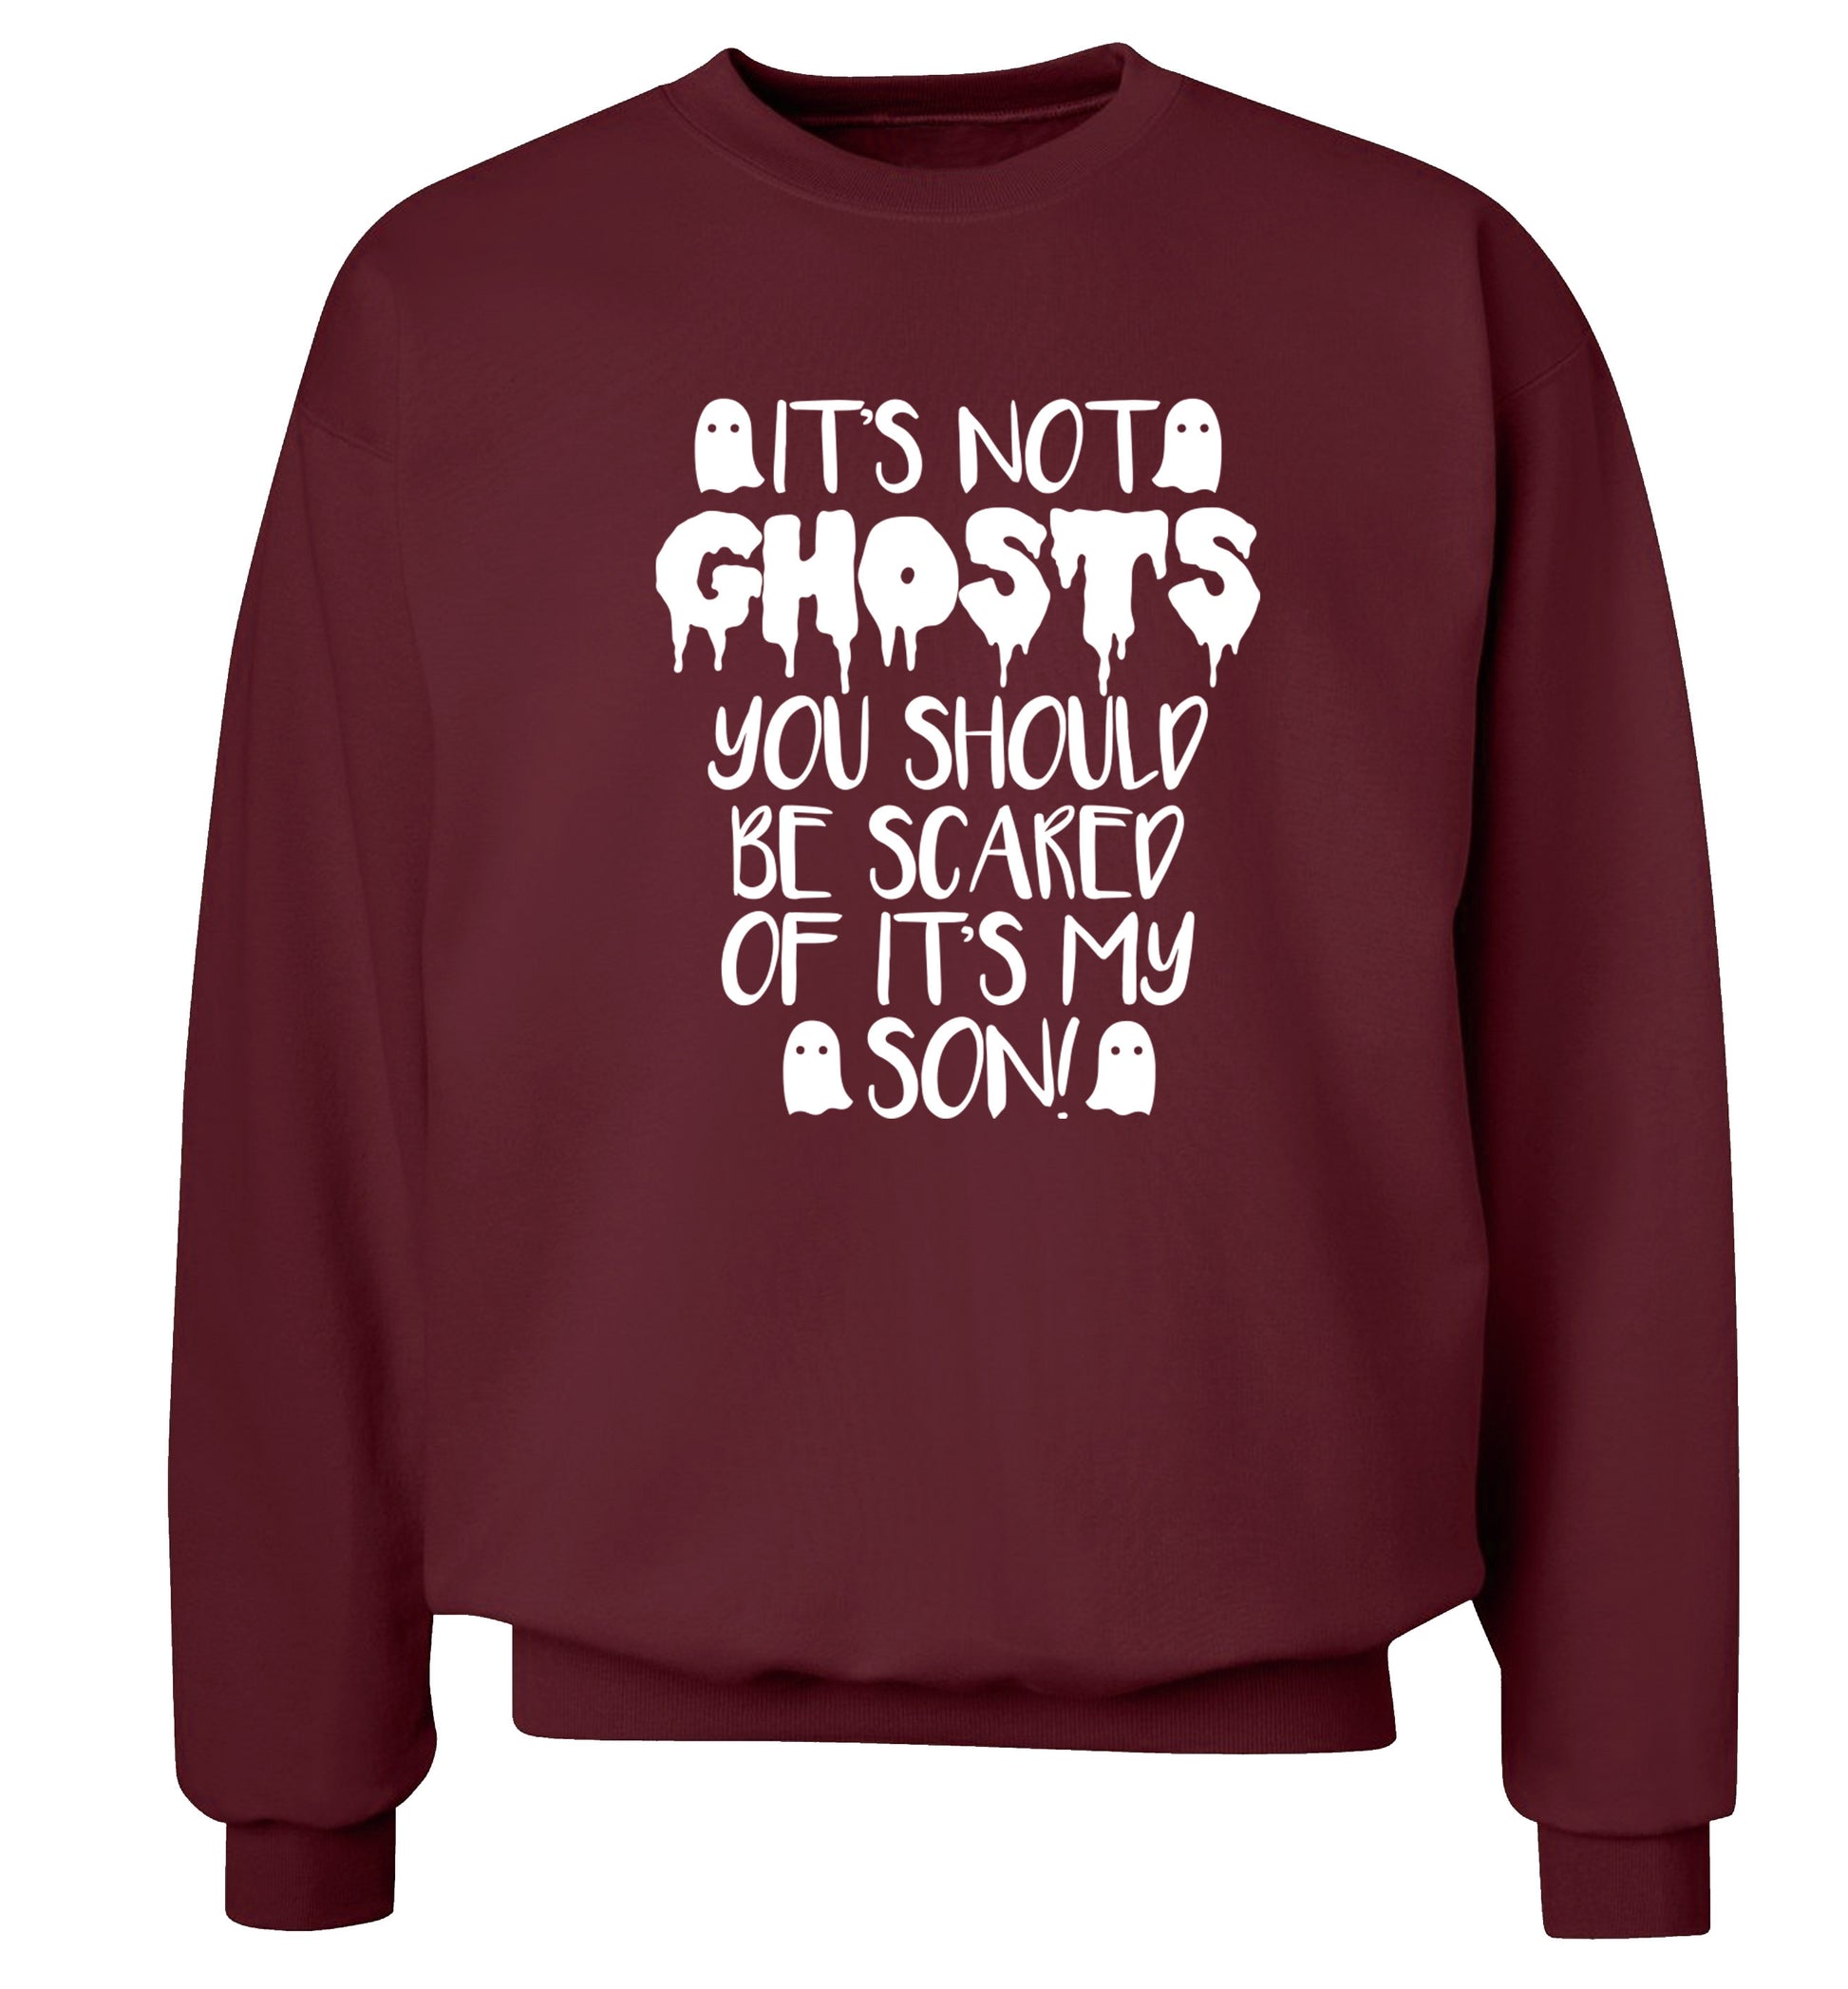 It's not ghosts you should be scared of it's my son! Adult's unisex maroon Sweater 2XL